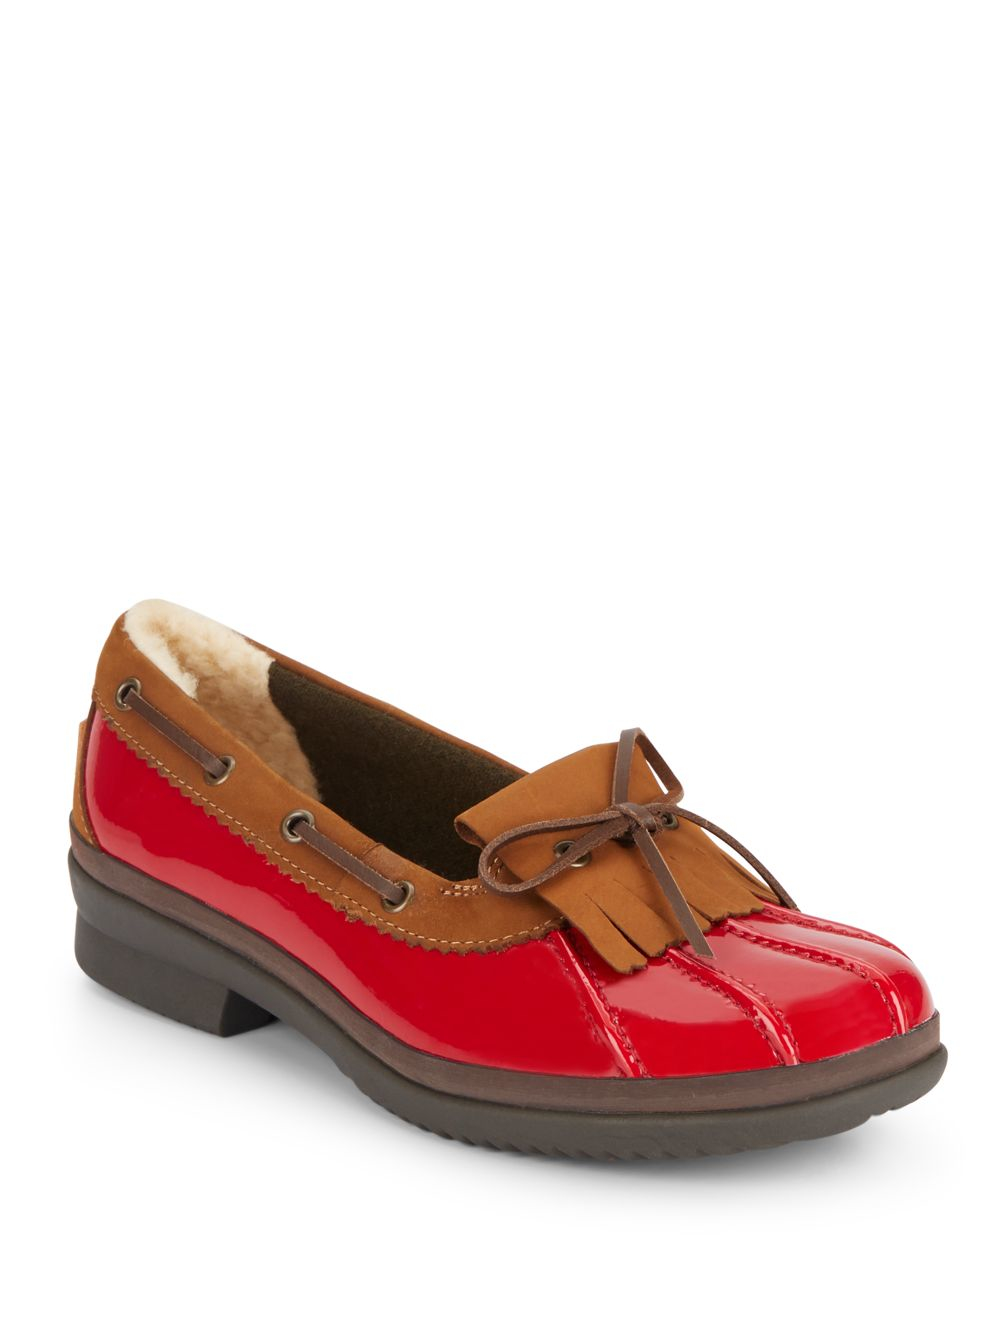 Ugg Haylie Patent Leather Loafers in Red | Lyst